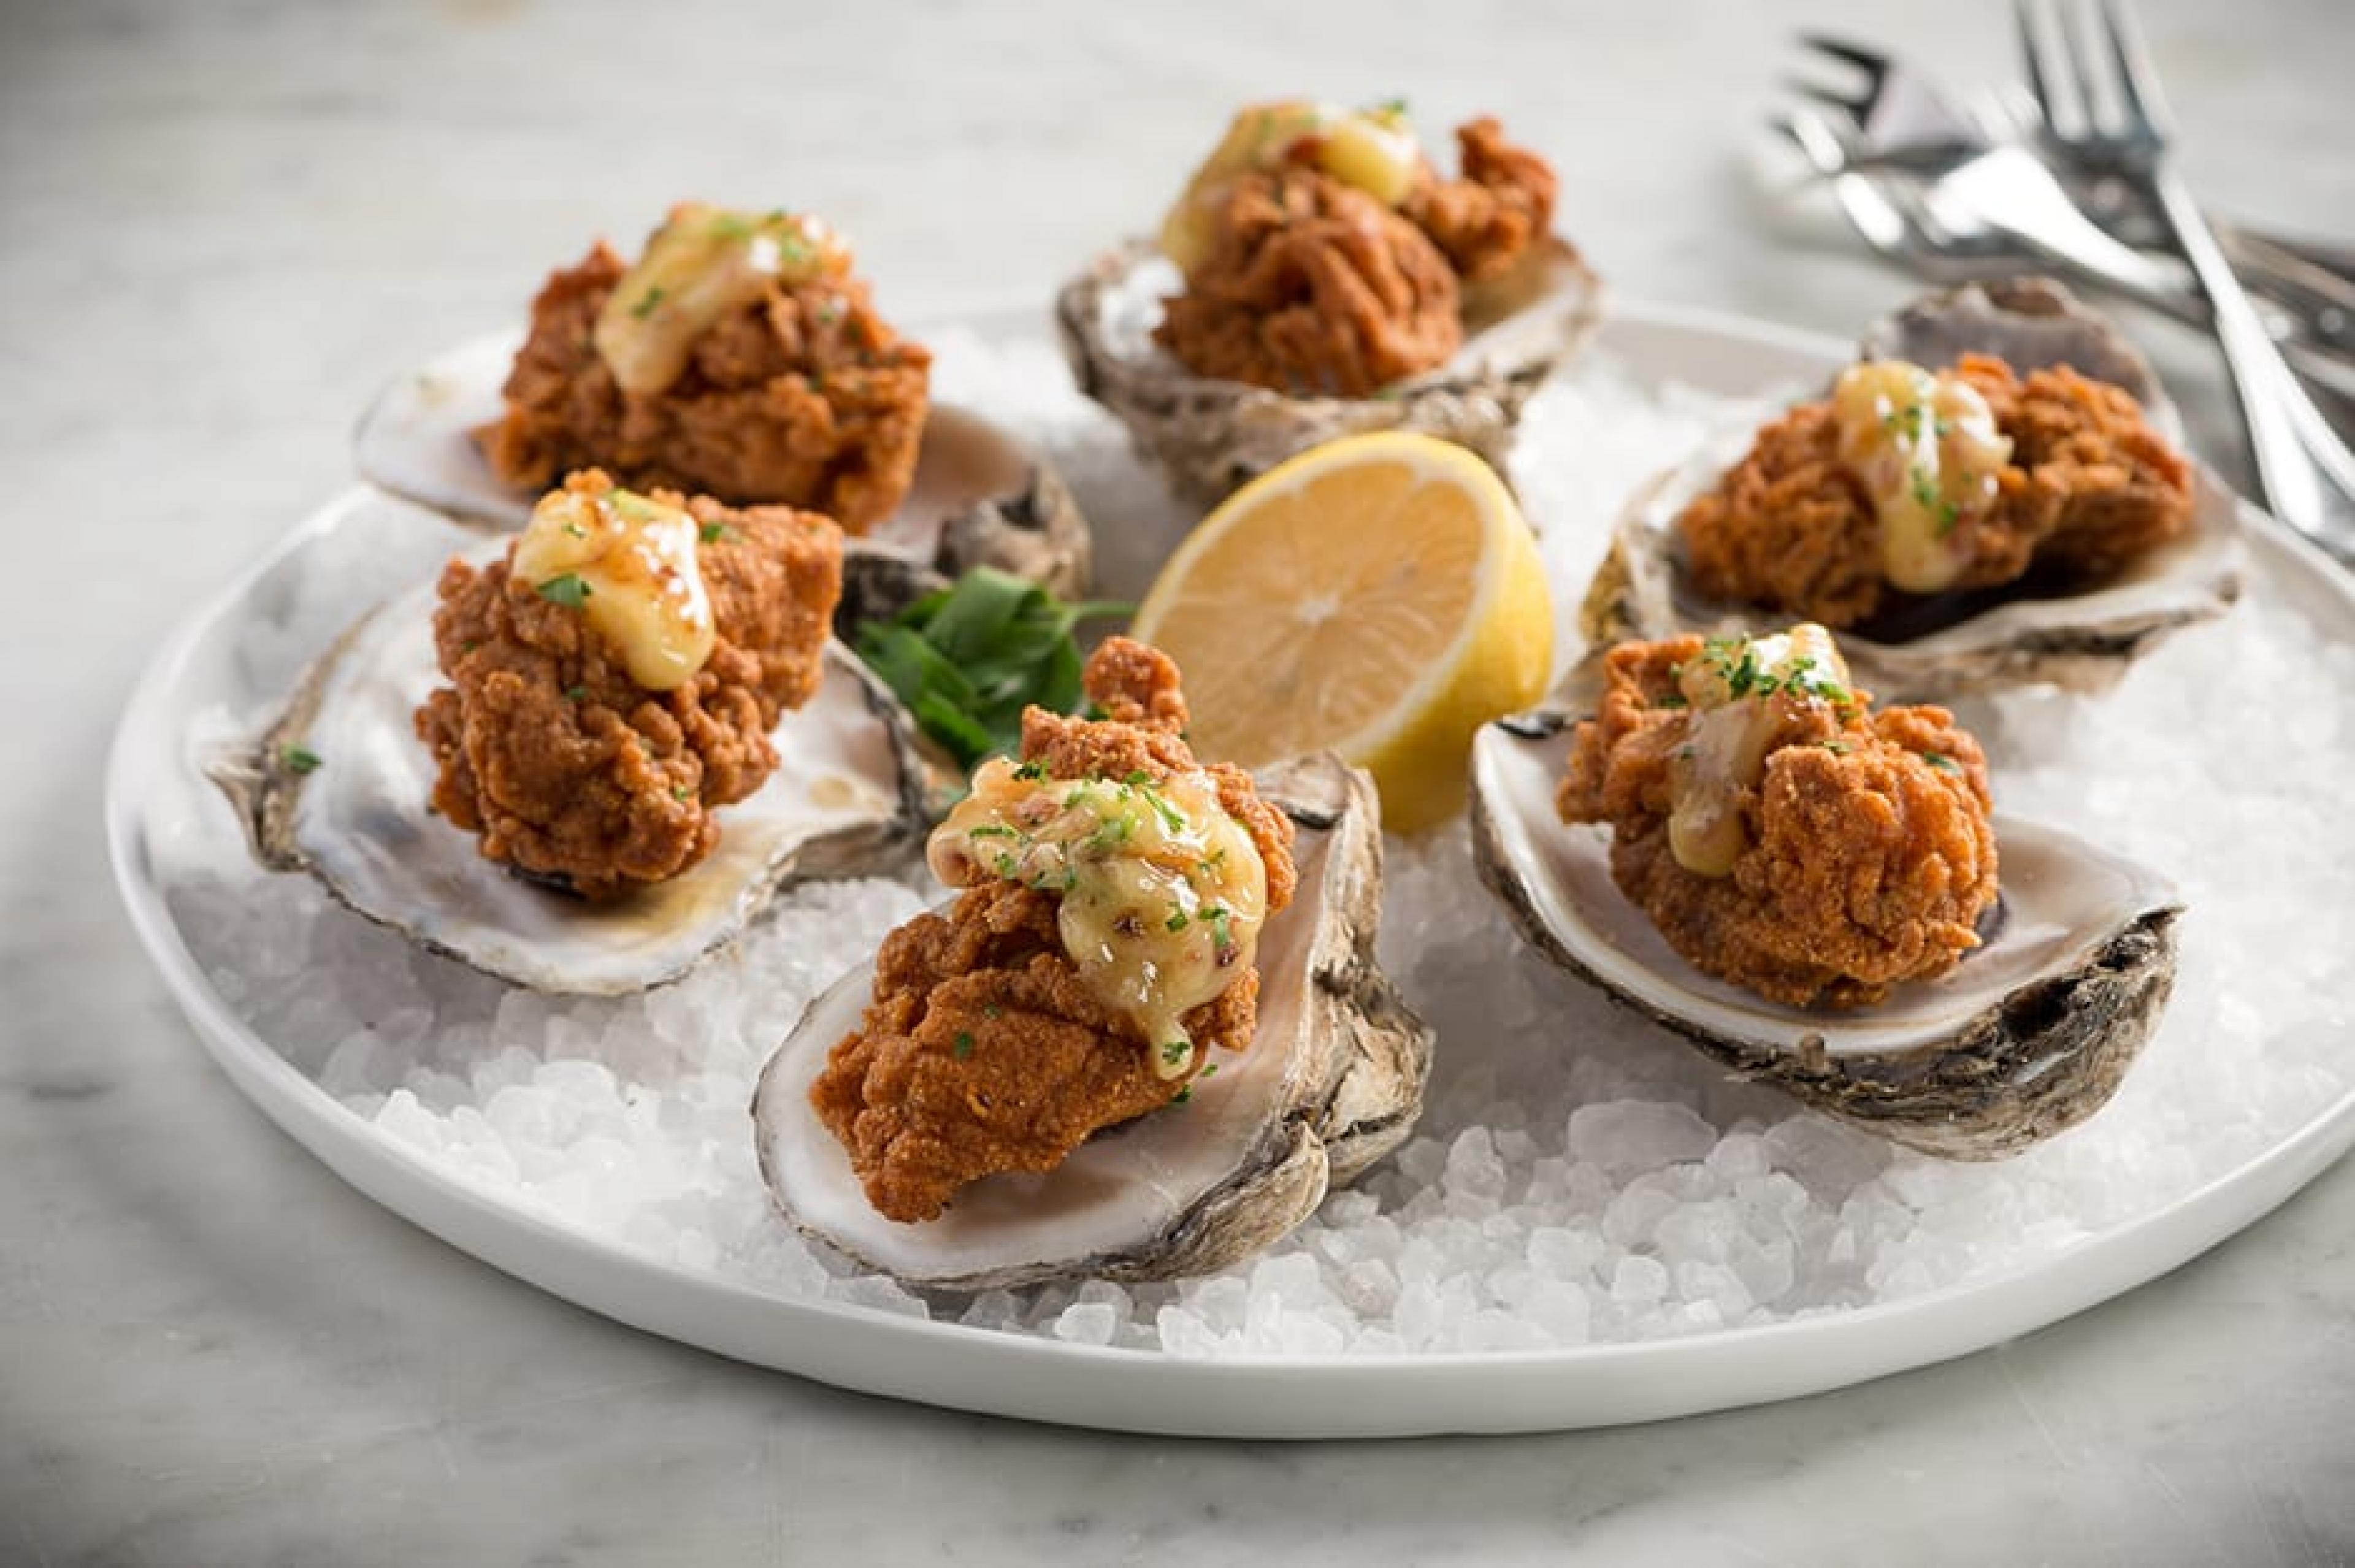 Fried oysters at Mr. B's Bistro New Orleans